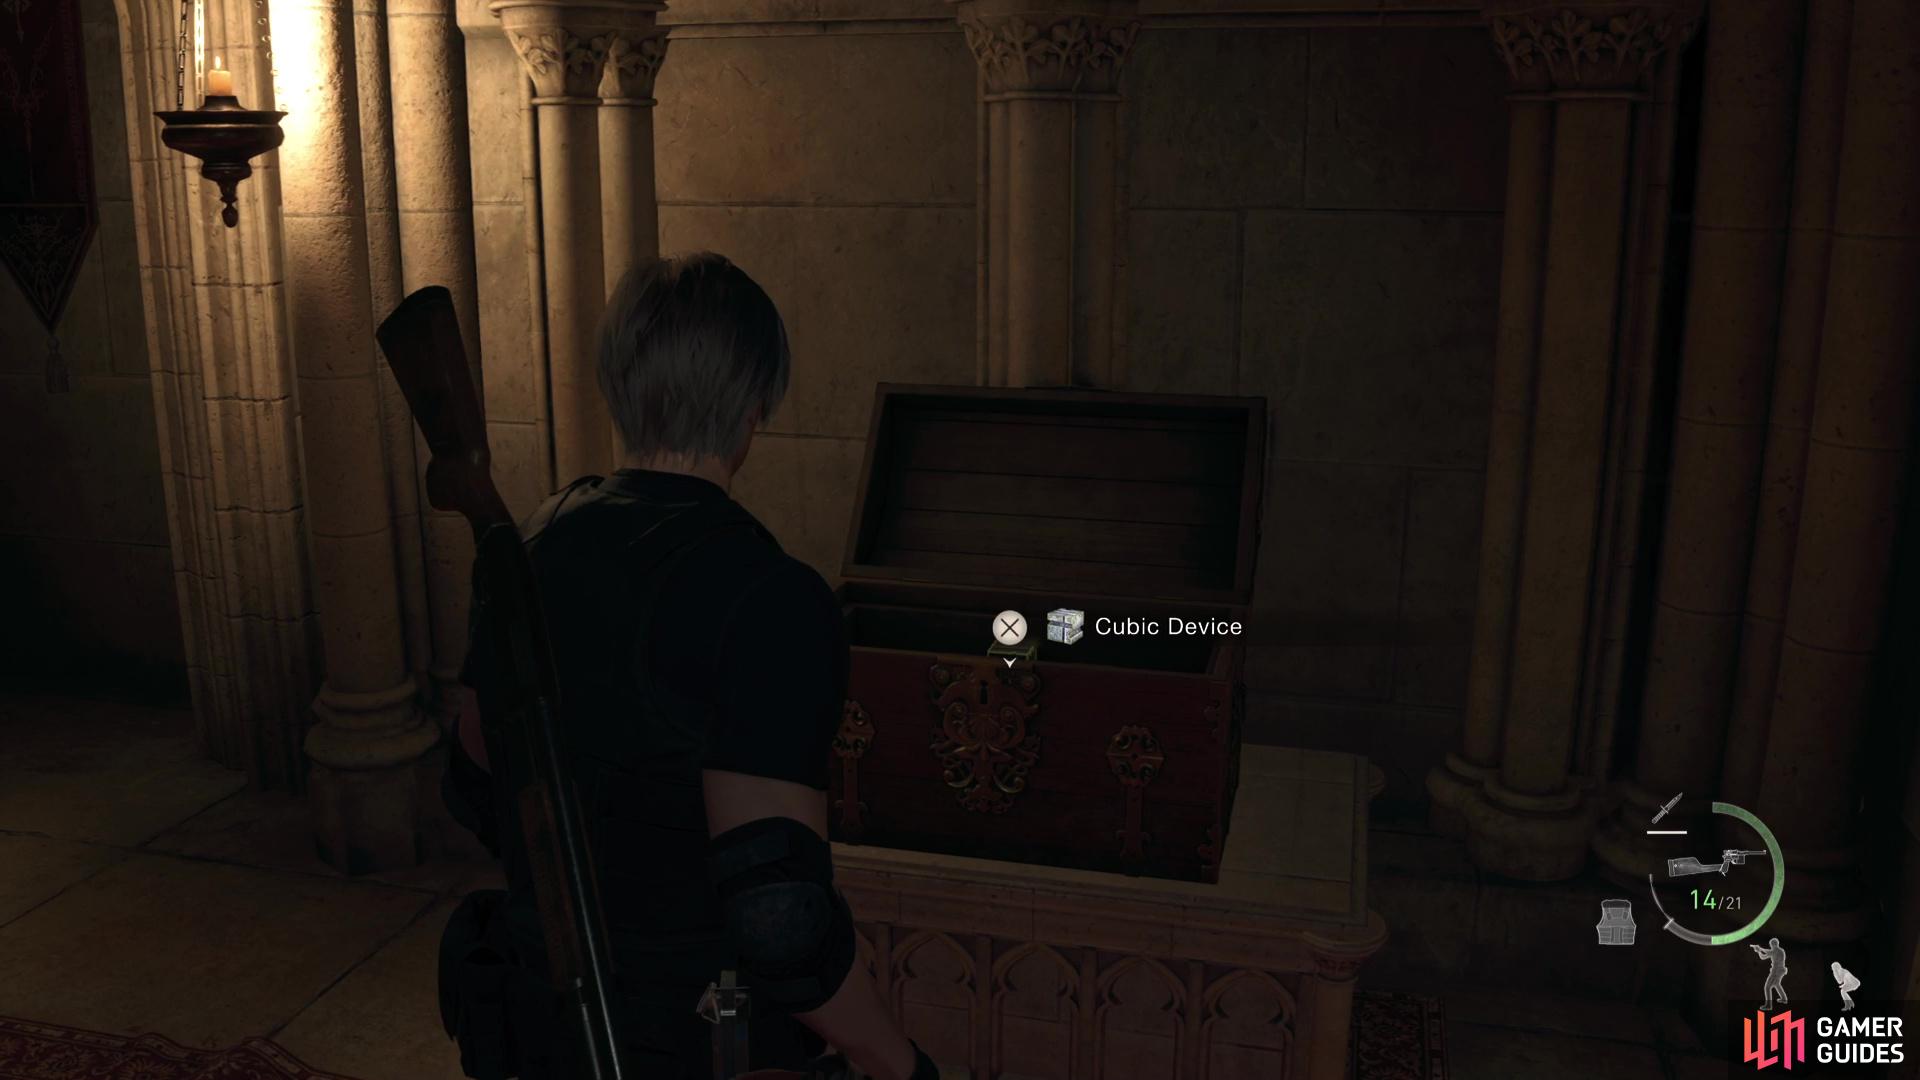 You will need the Cubic Device to get into the square lock boxes in Resident Evil 4 Remake.